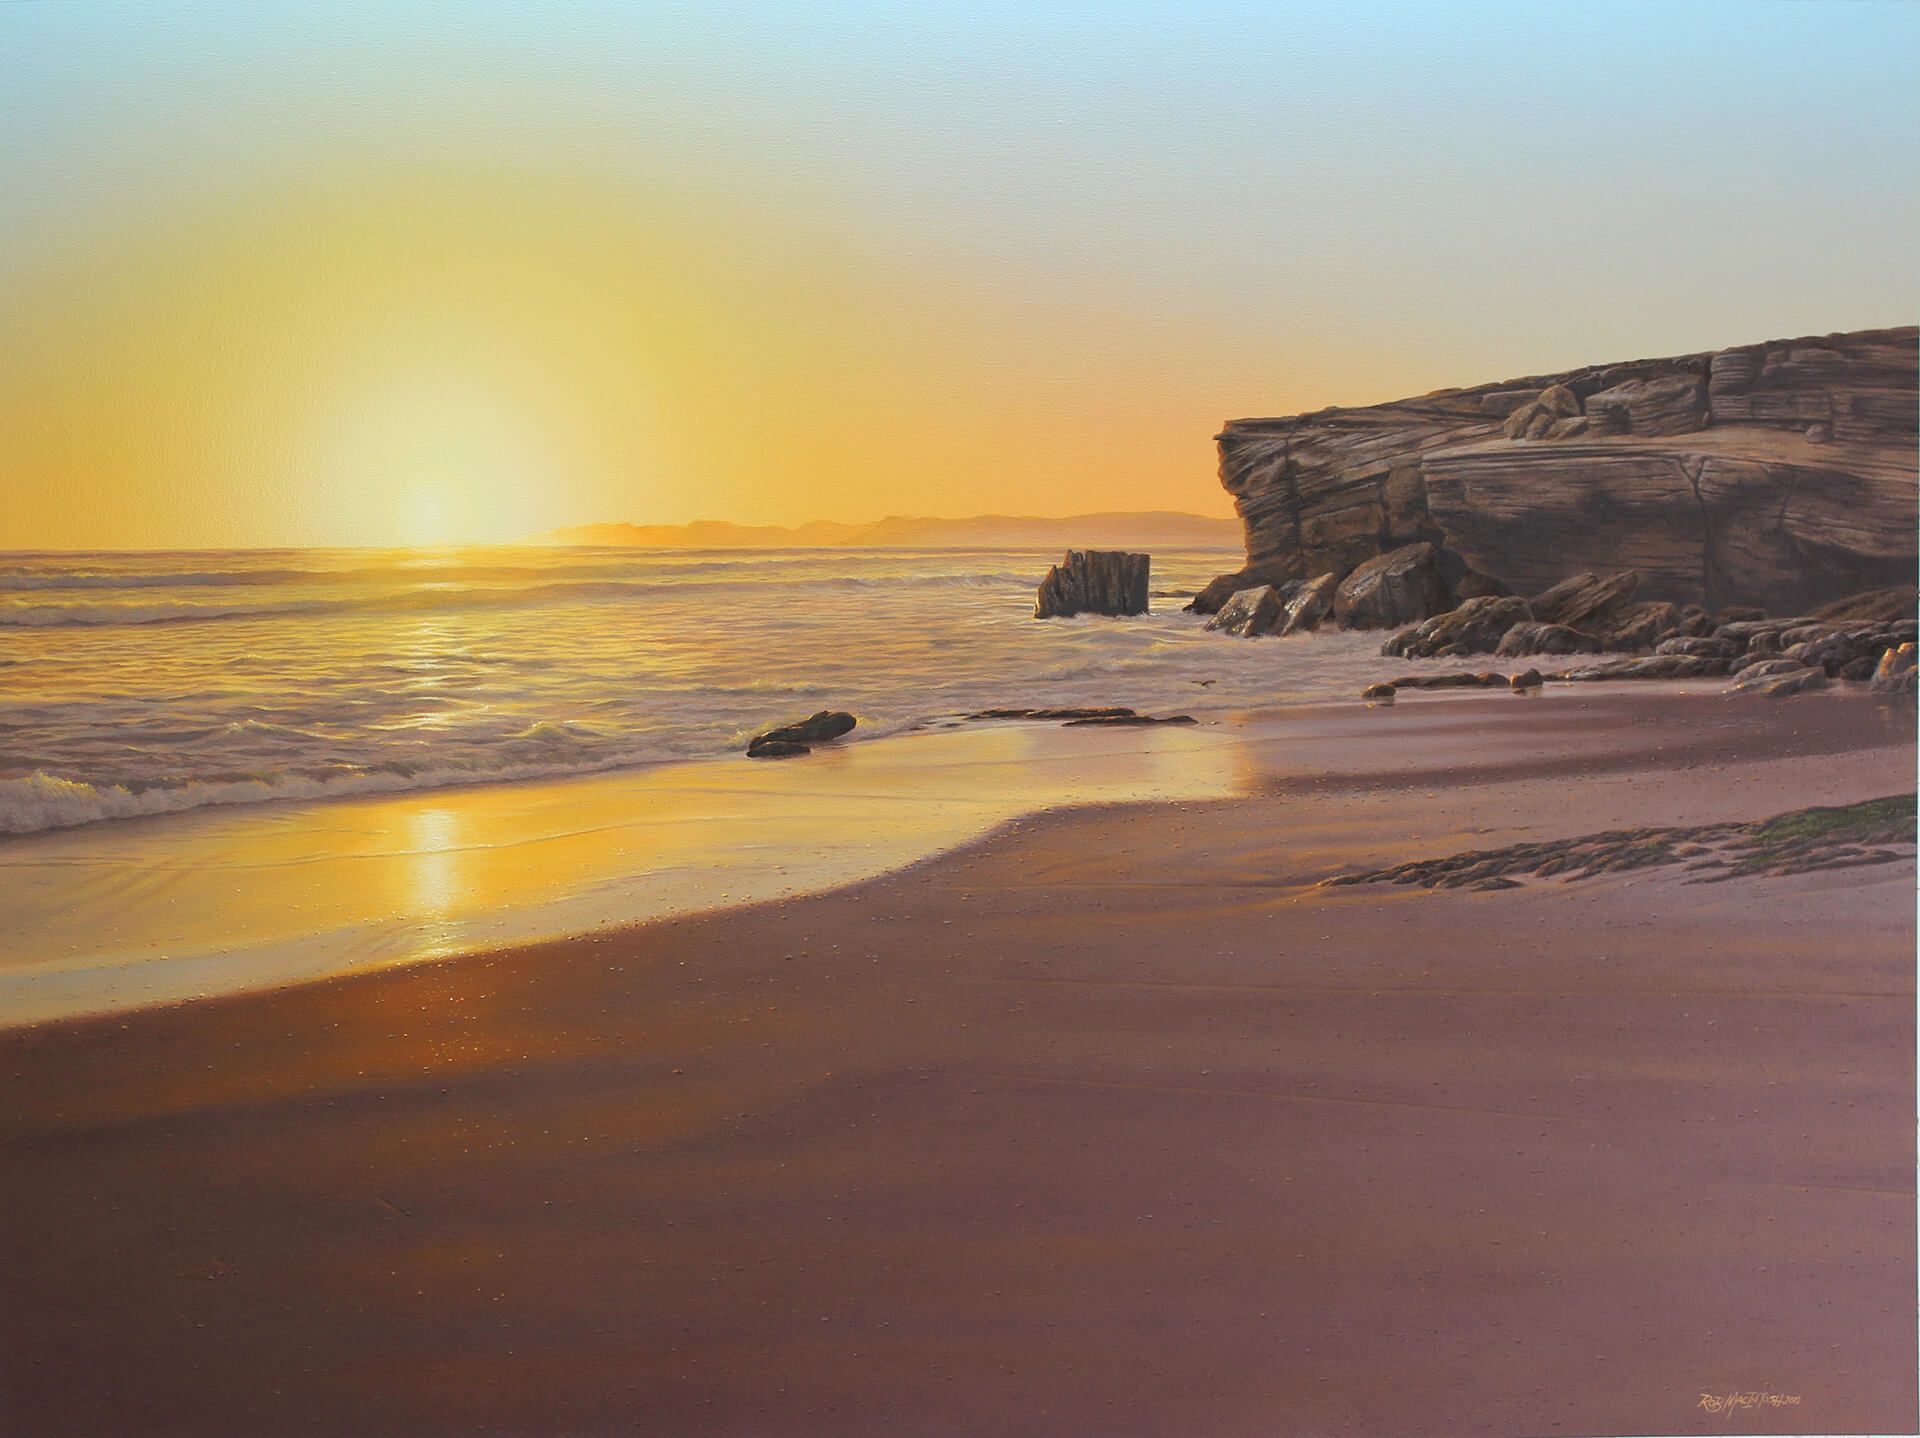 Photorealistic painting of a sunset in Die Plaat